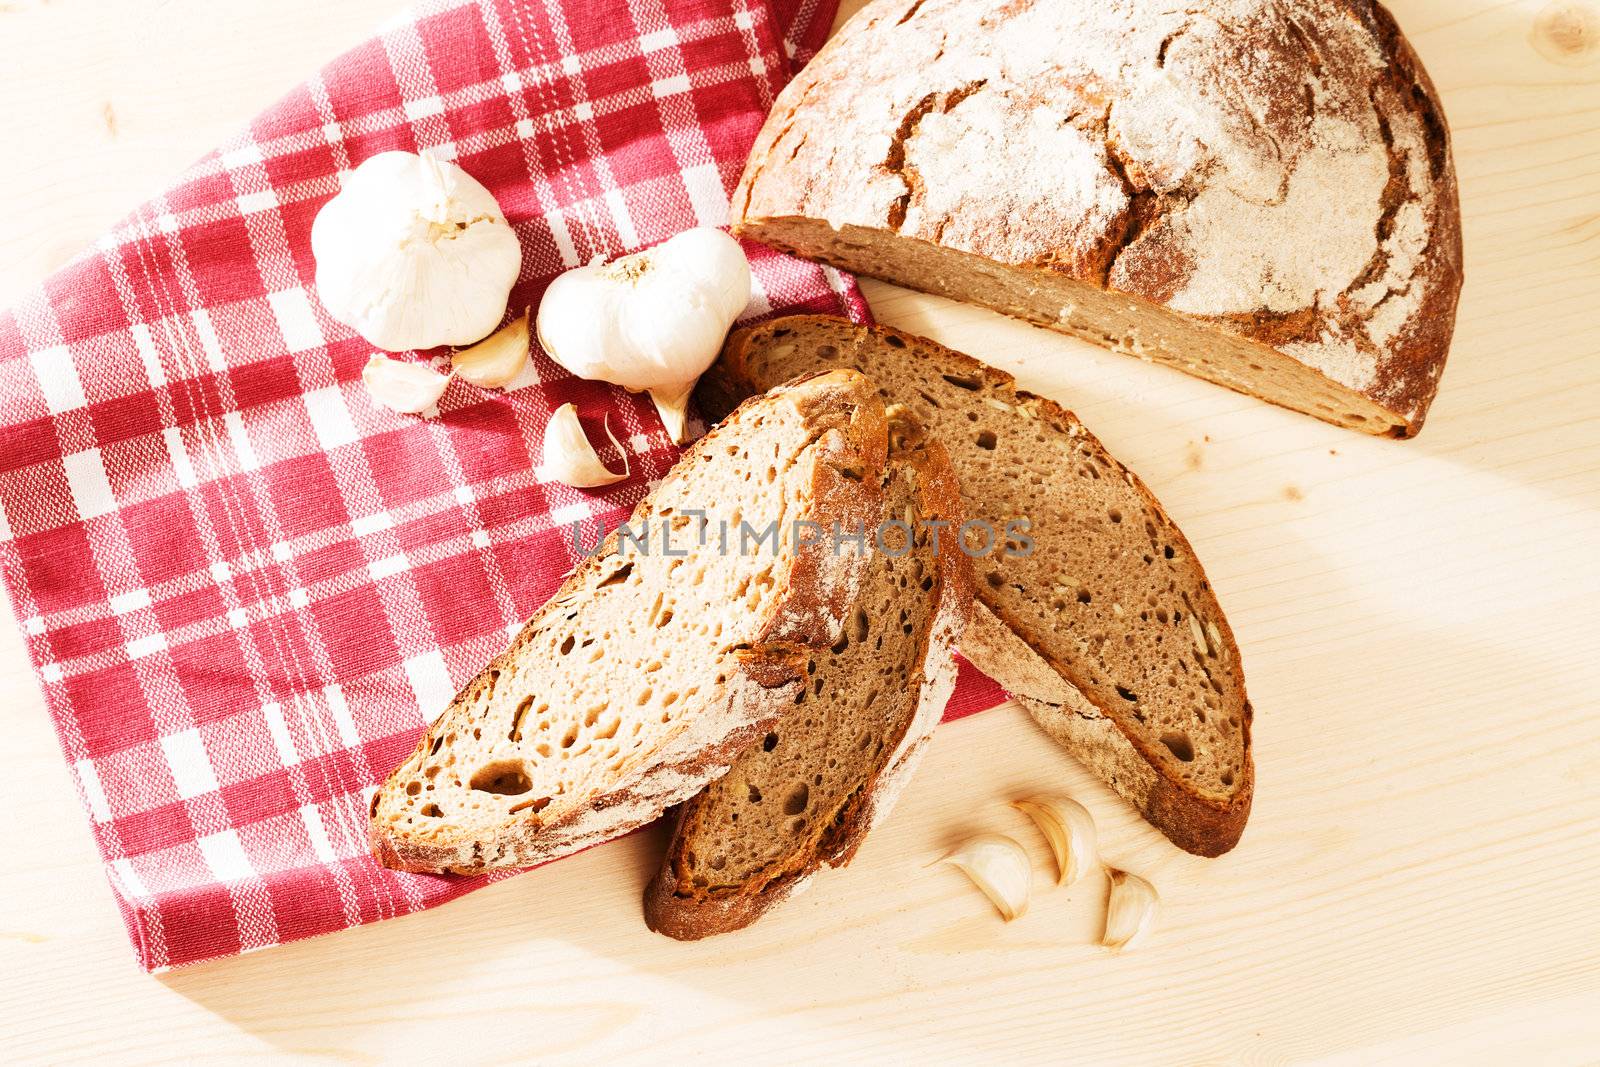 rustic rye bread from top with garlic on wooden background with a towel